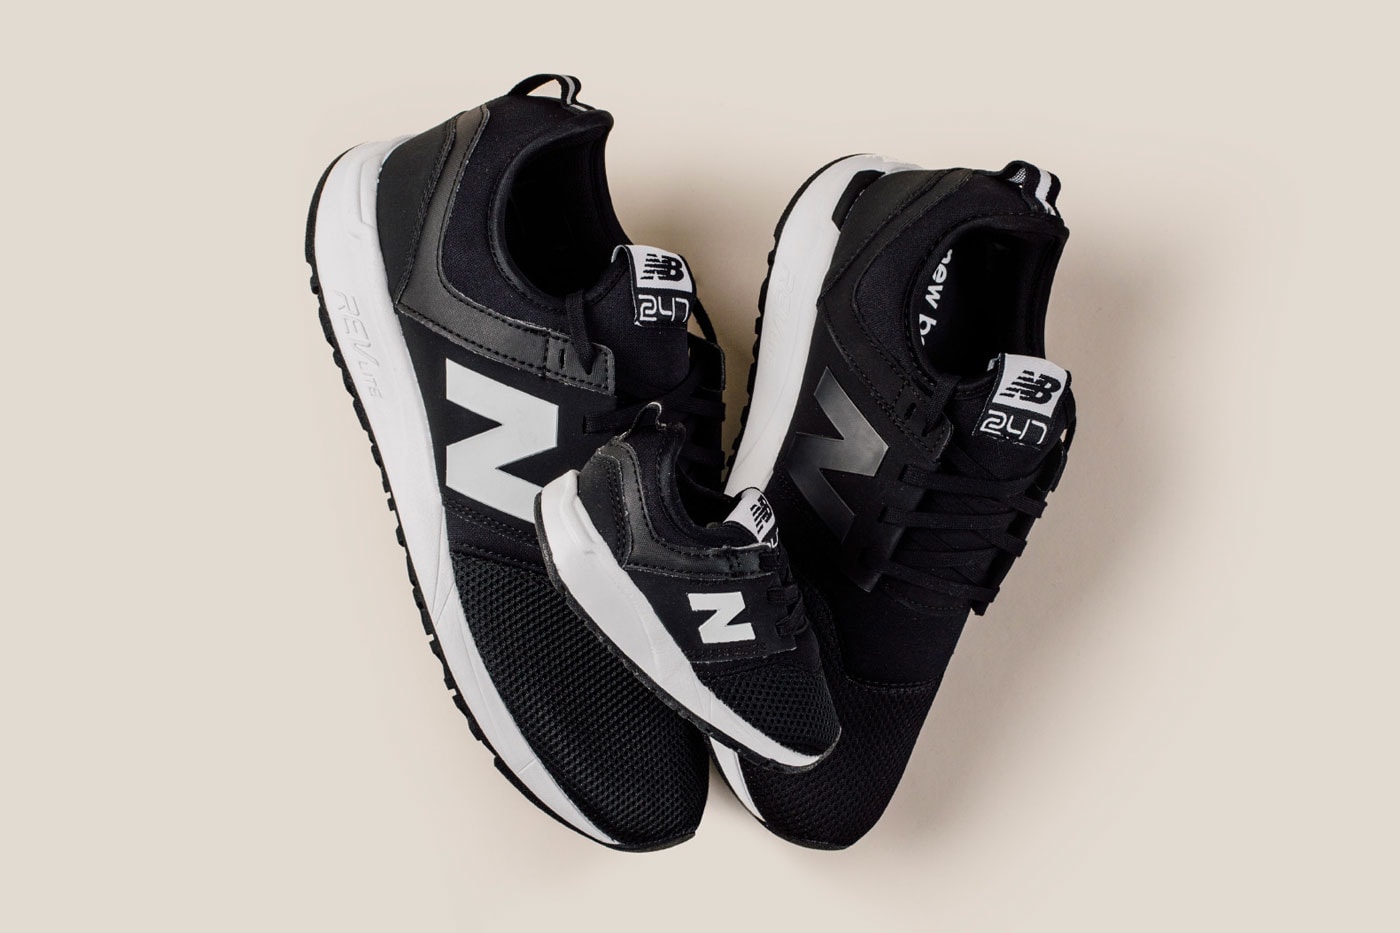 New Balance 247 "Classic" Collection